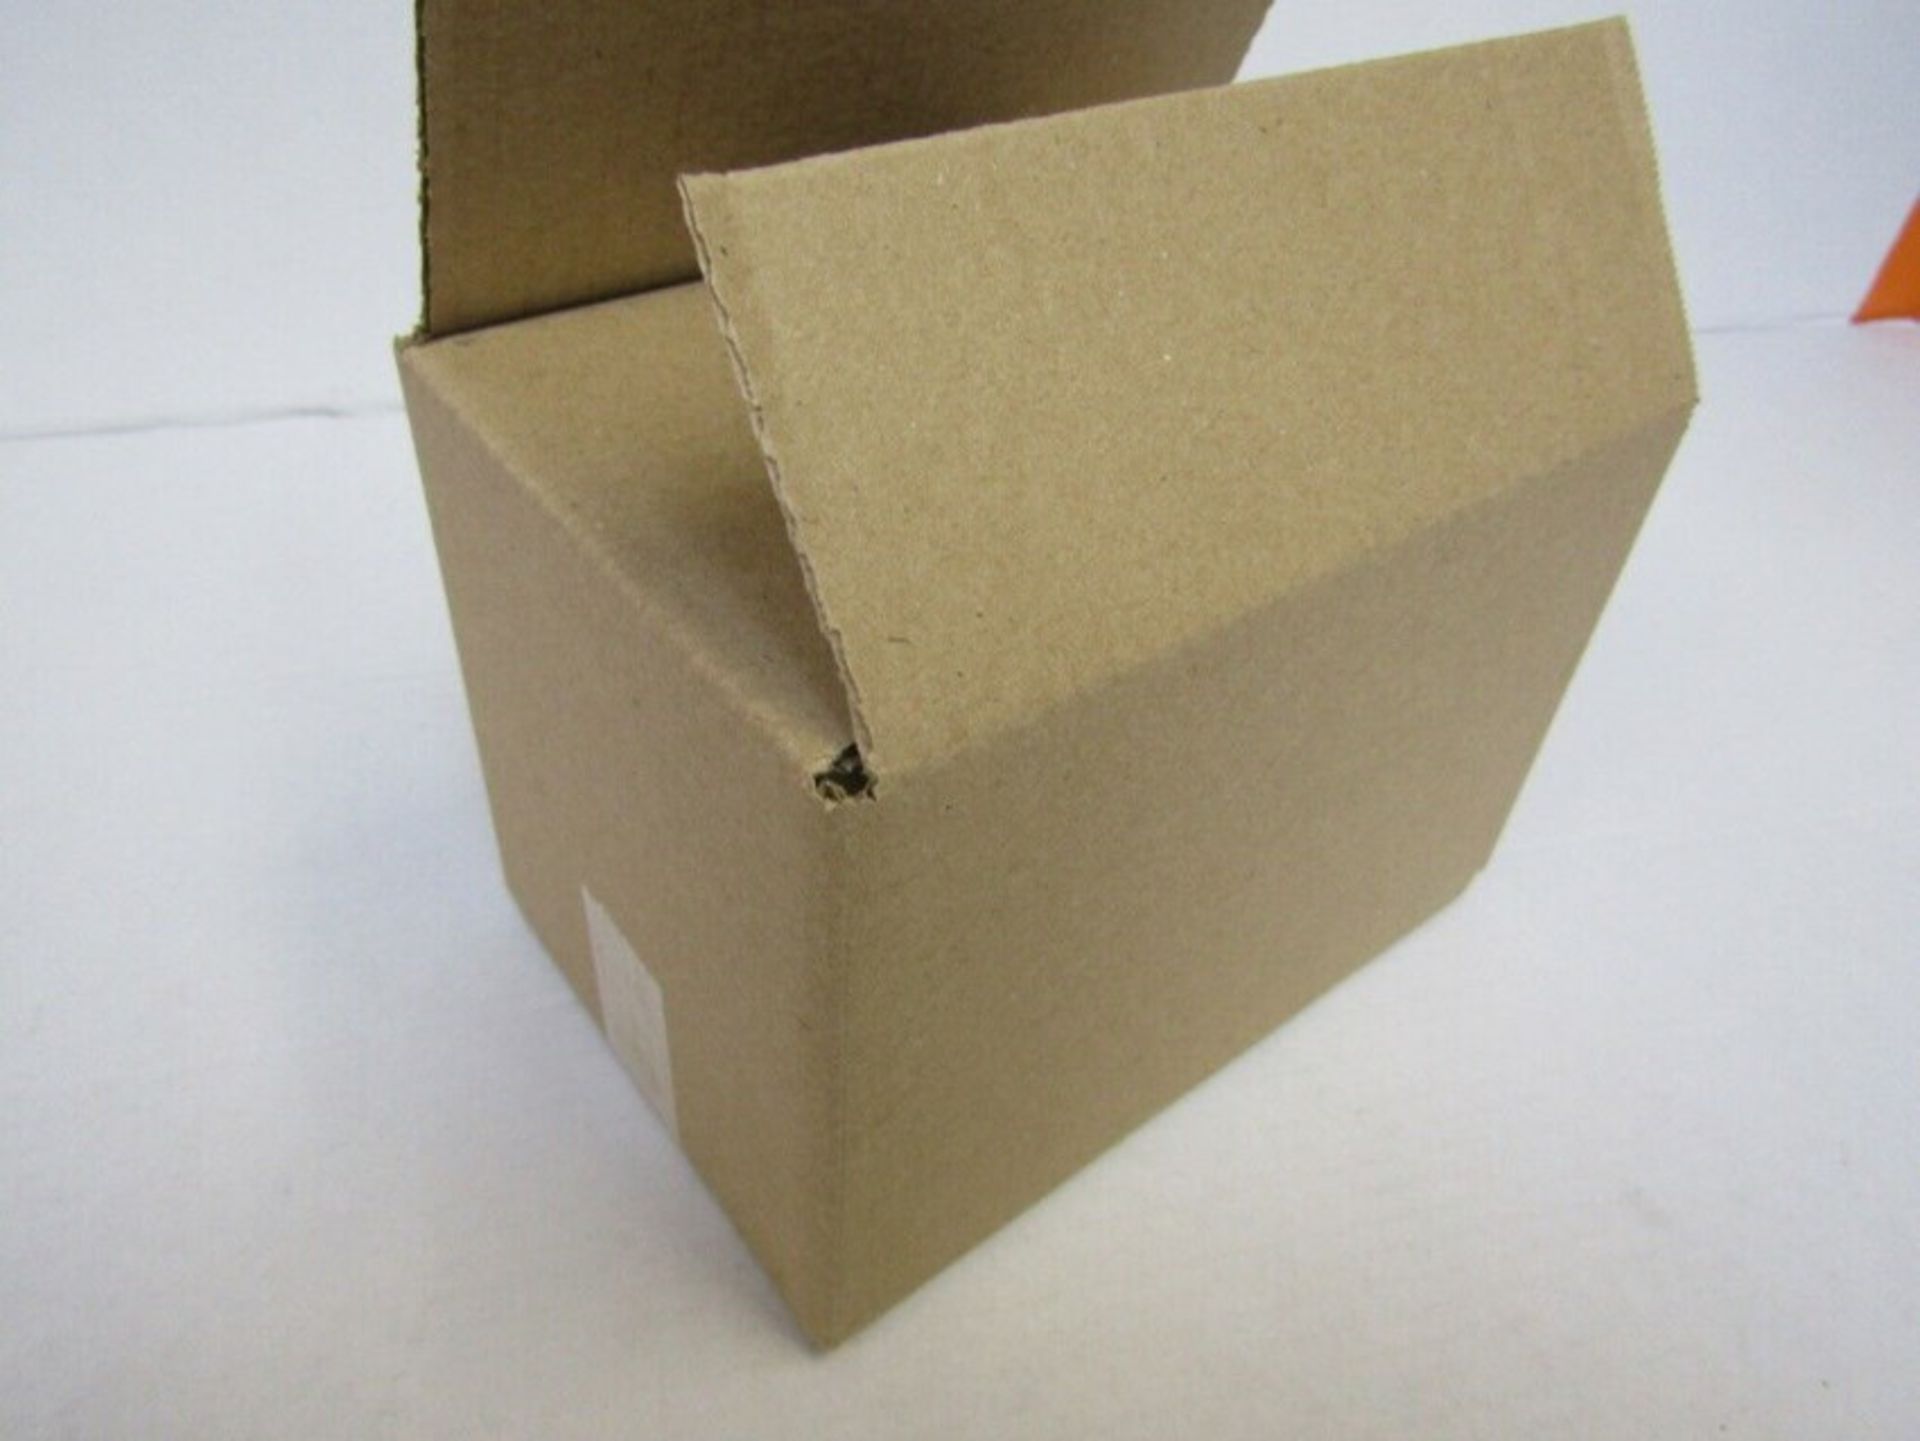 100 x Small Packing Box. Cardboard Parcel. Single Wall - Image 2 of 2